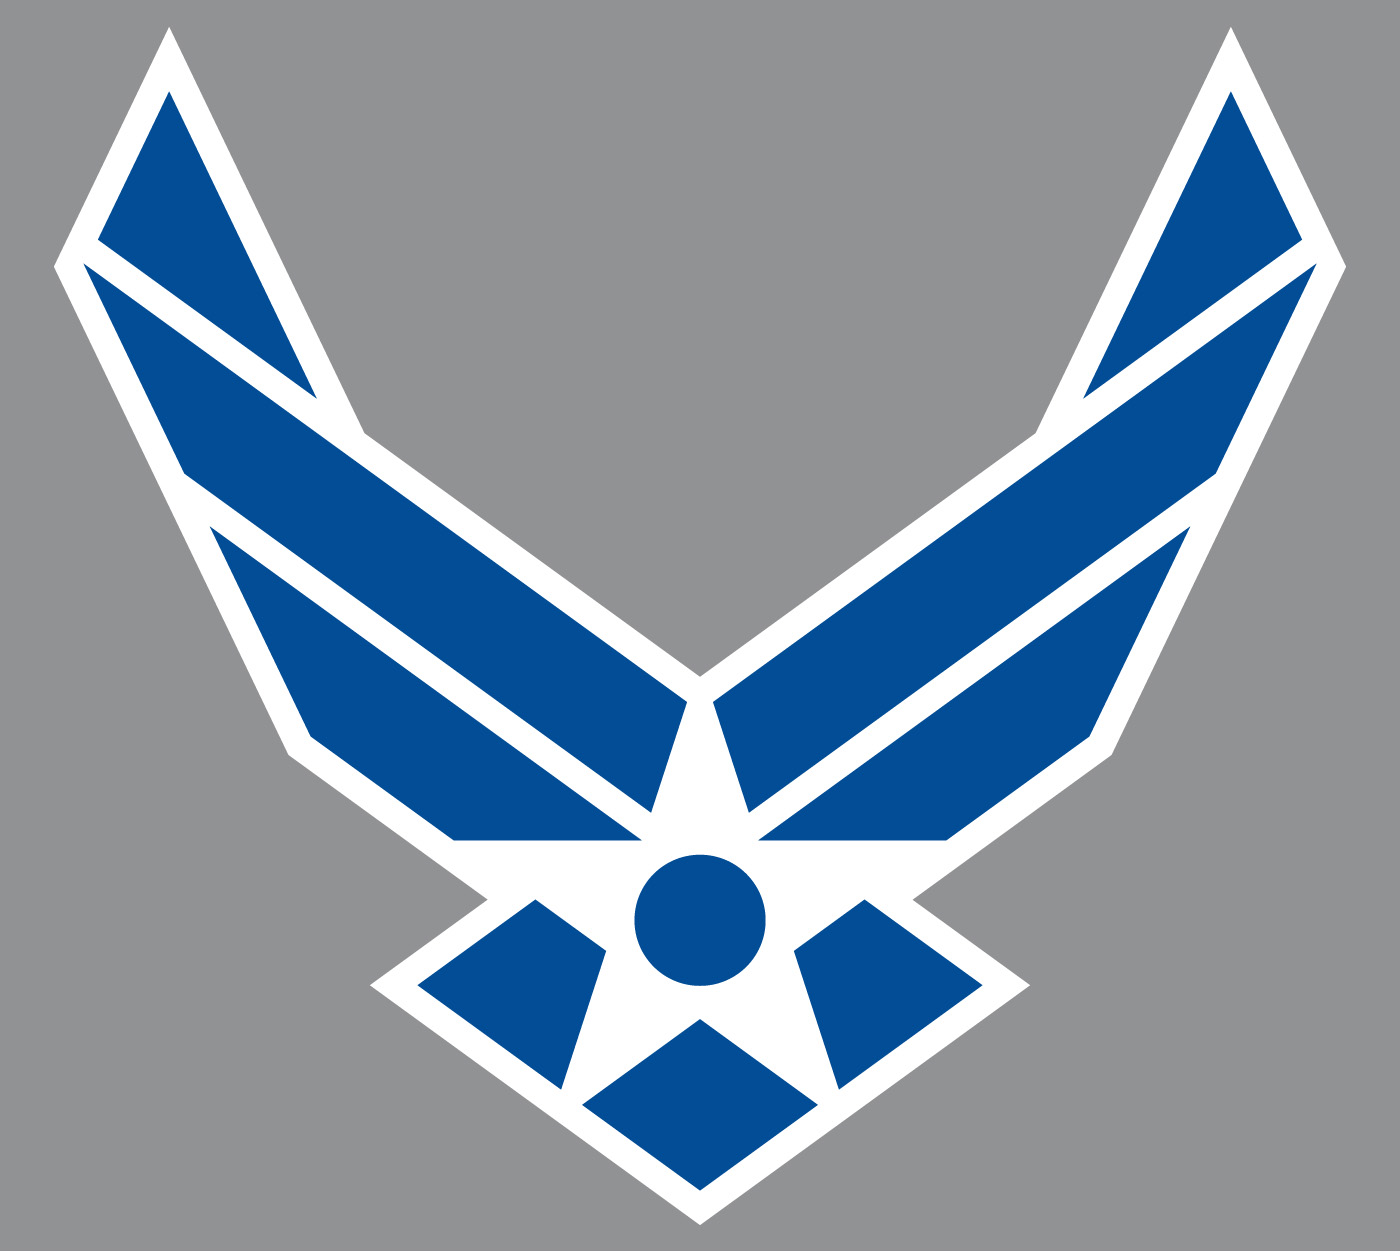 Air Force Symbol Blue With White Outline On Gray Background